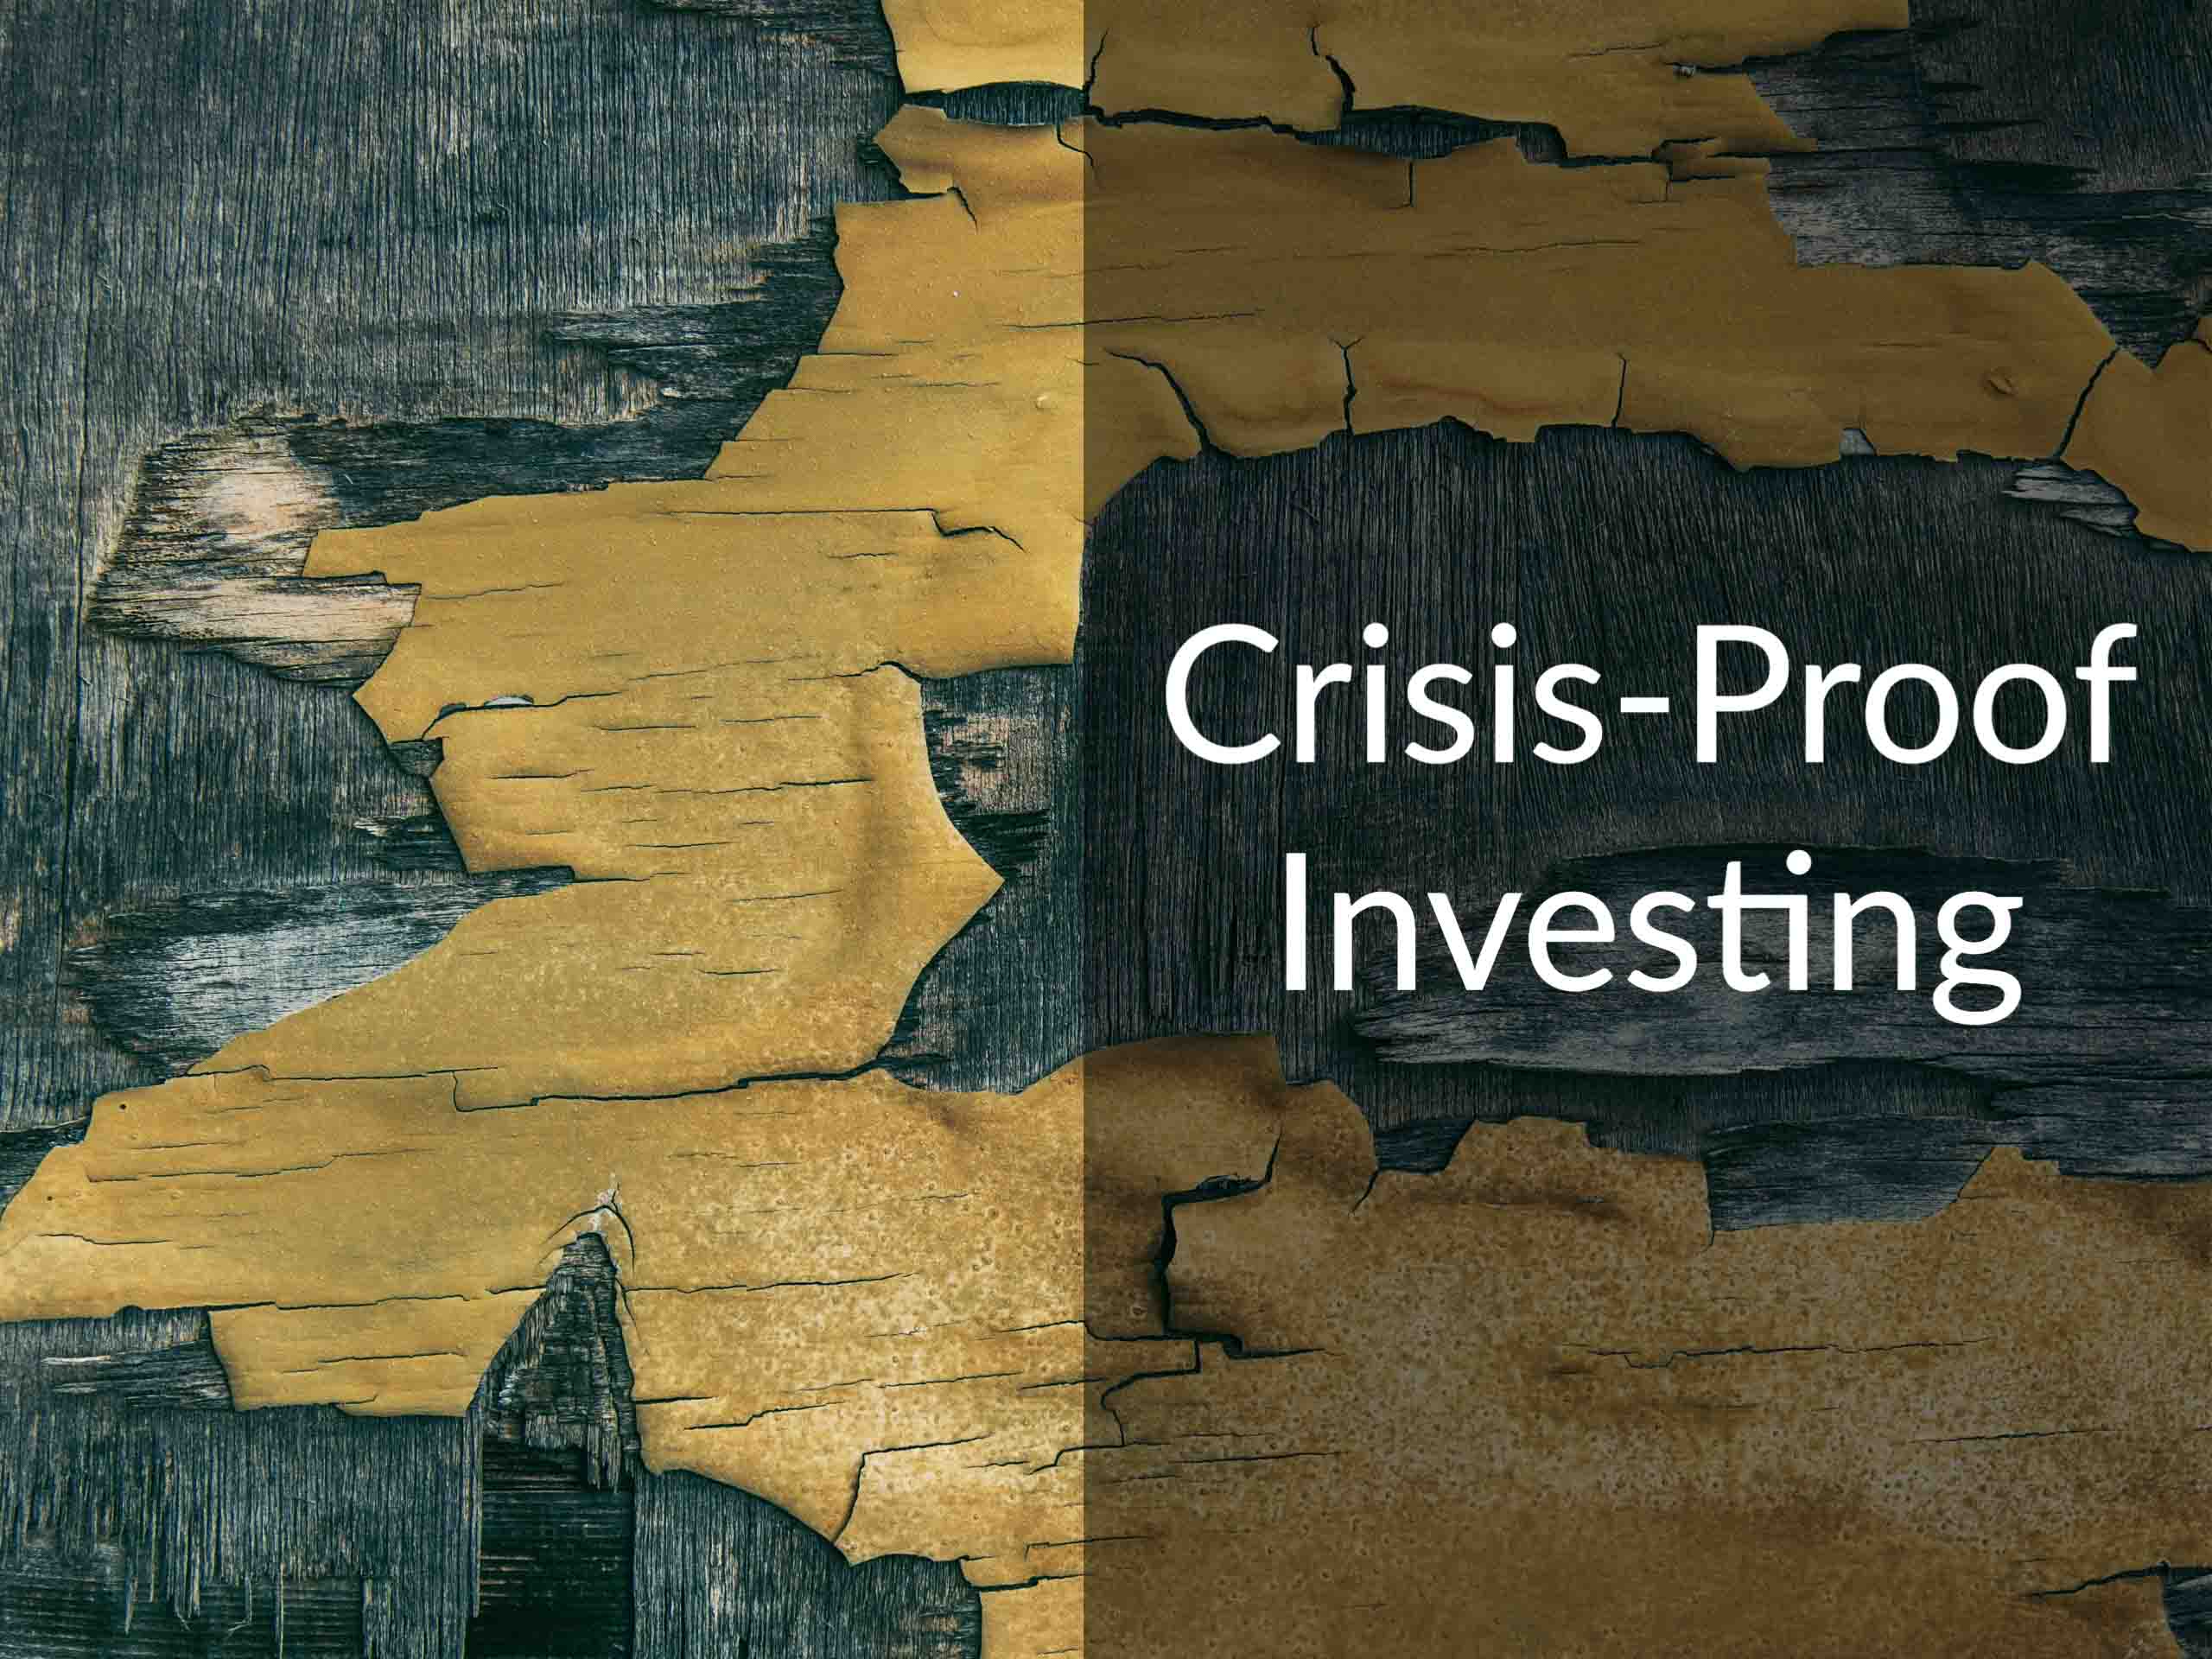 Peeling paint on old wood with caption "Crisis-Proof Investing"